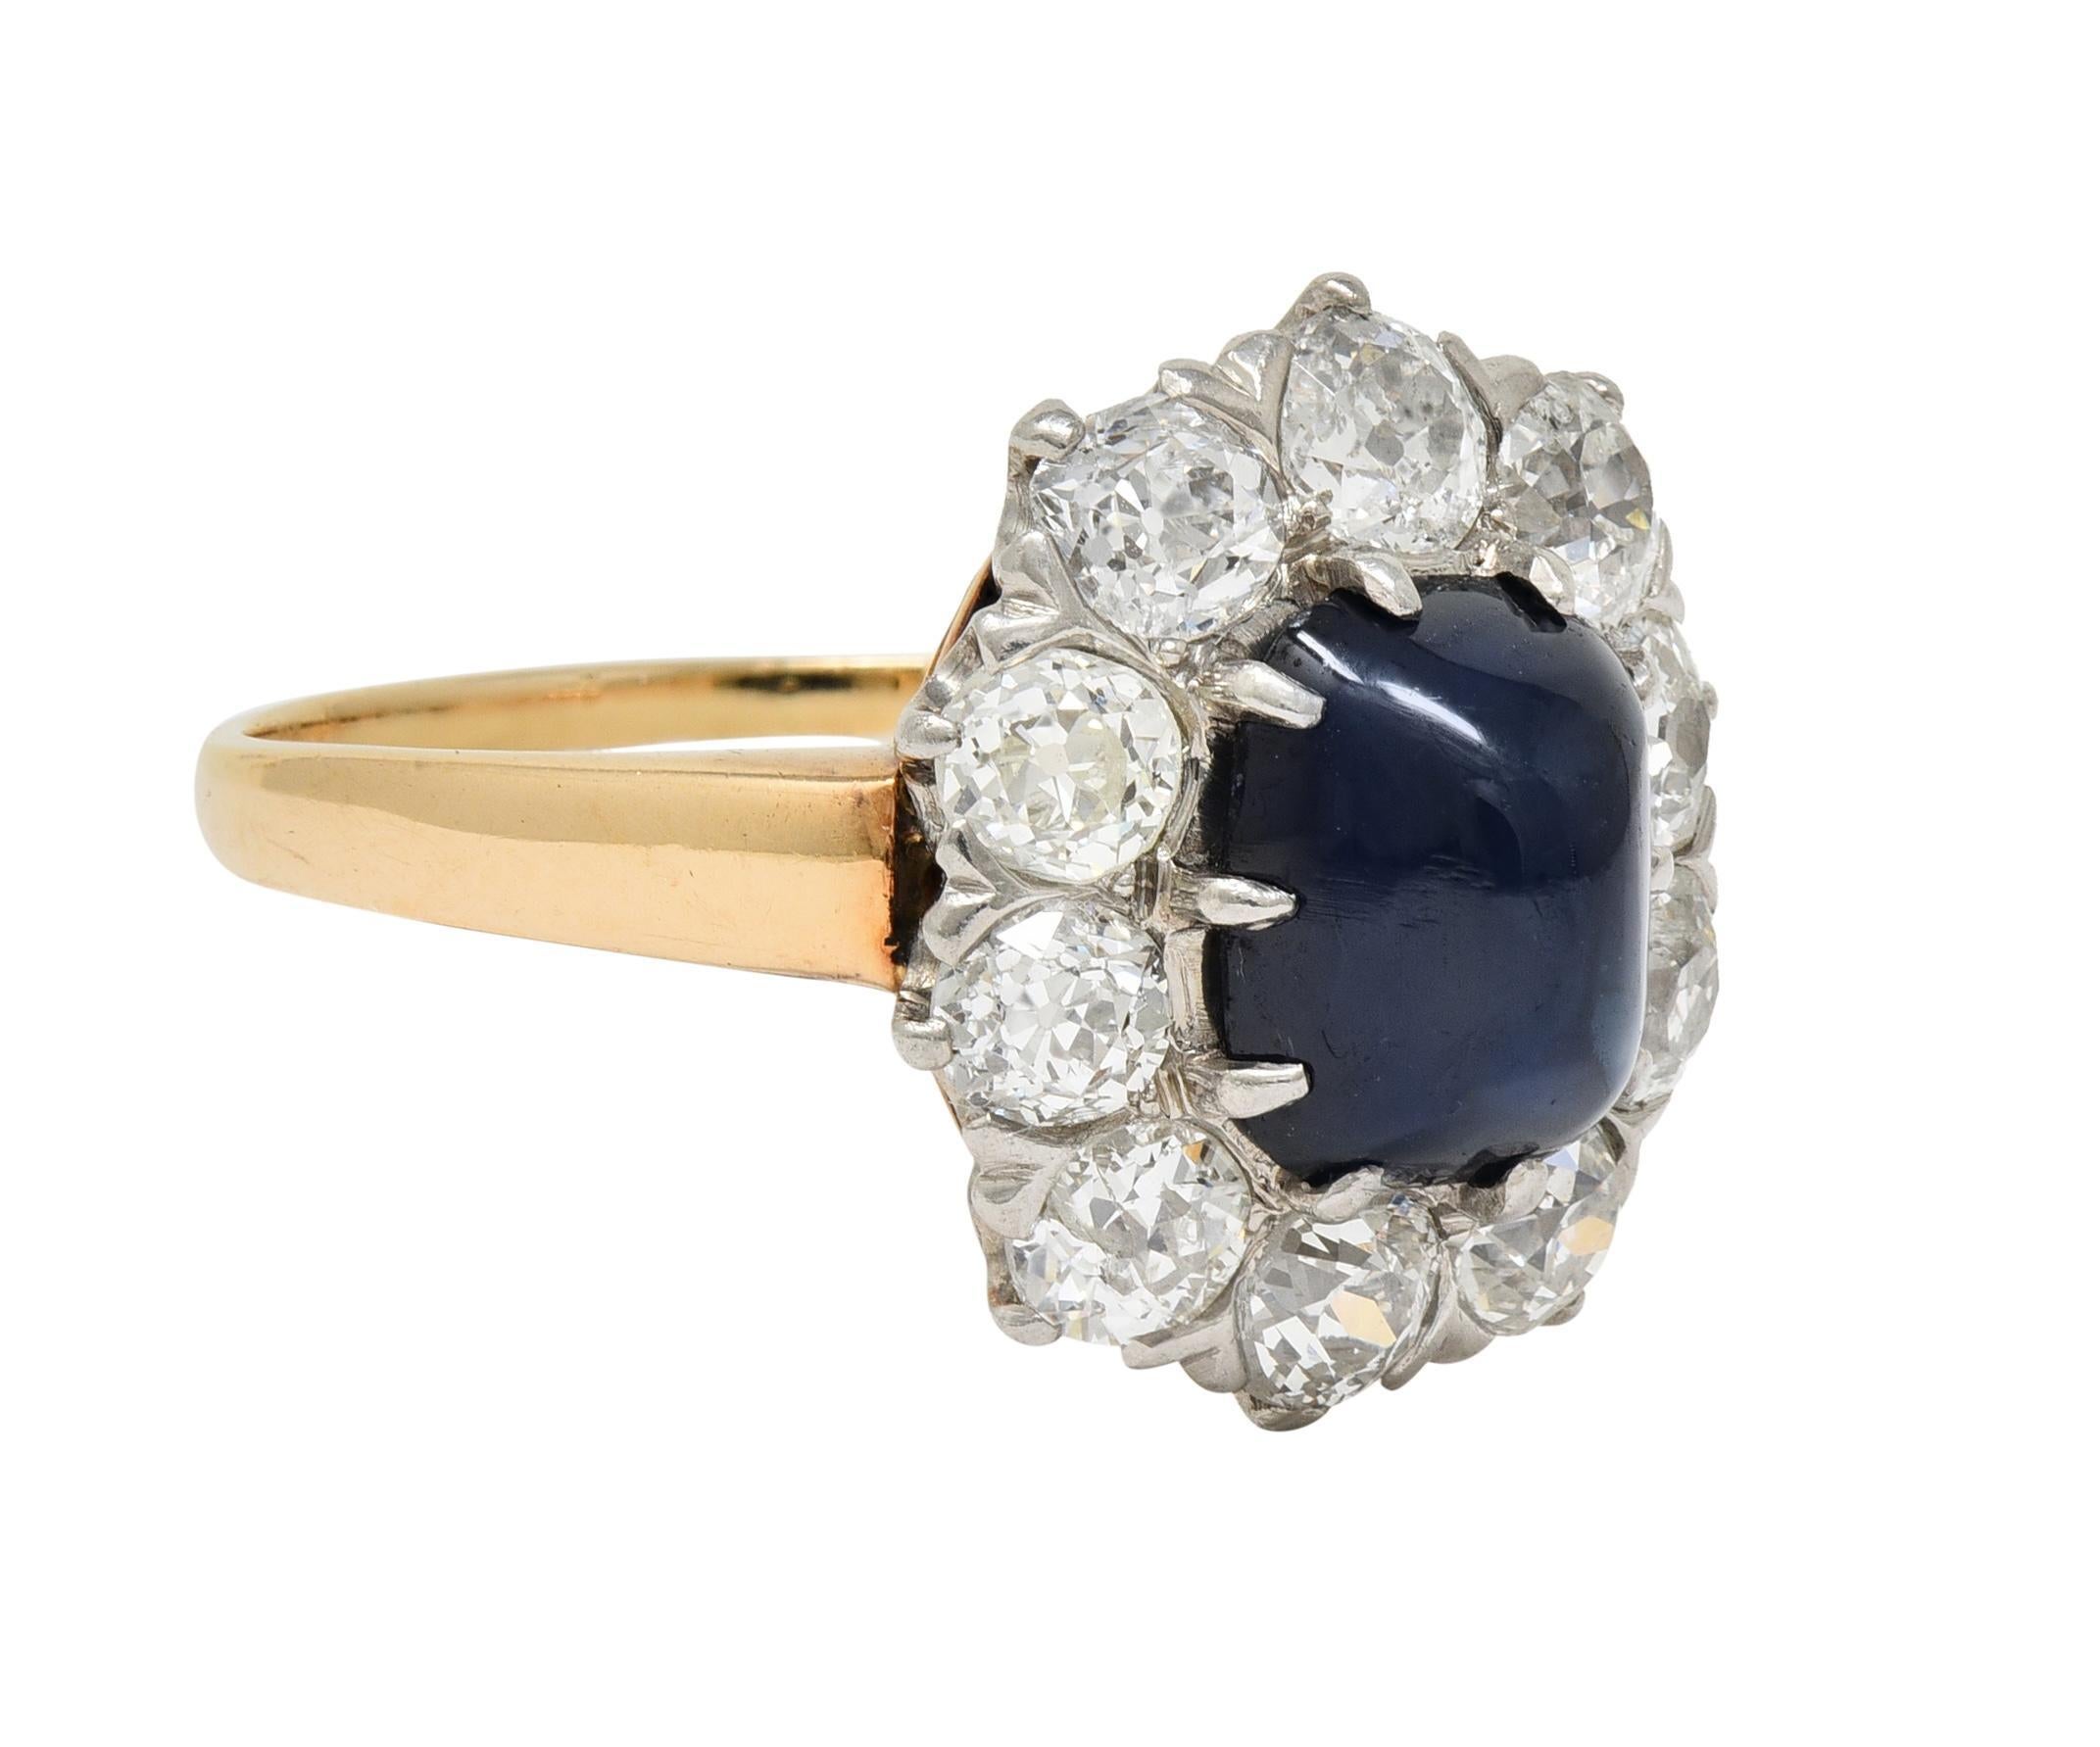 Centering a sugarloaf-shaped sapphire cabochon weighing approximately 2.30 carats total
Natural Cambodian in origin with no indications of heat treatment - transparent dark blue
Set with talon prongs in platinum-topped head with diamond halo